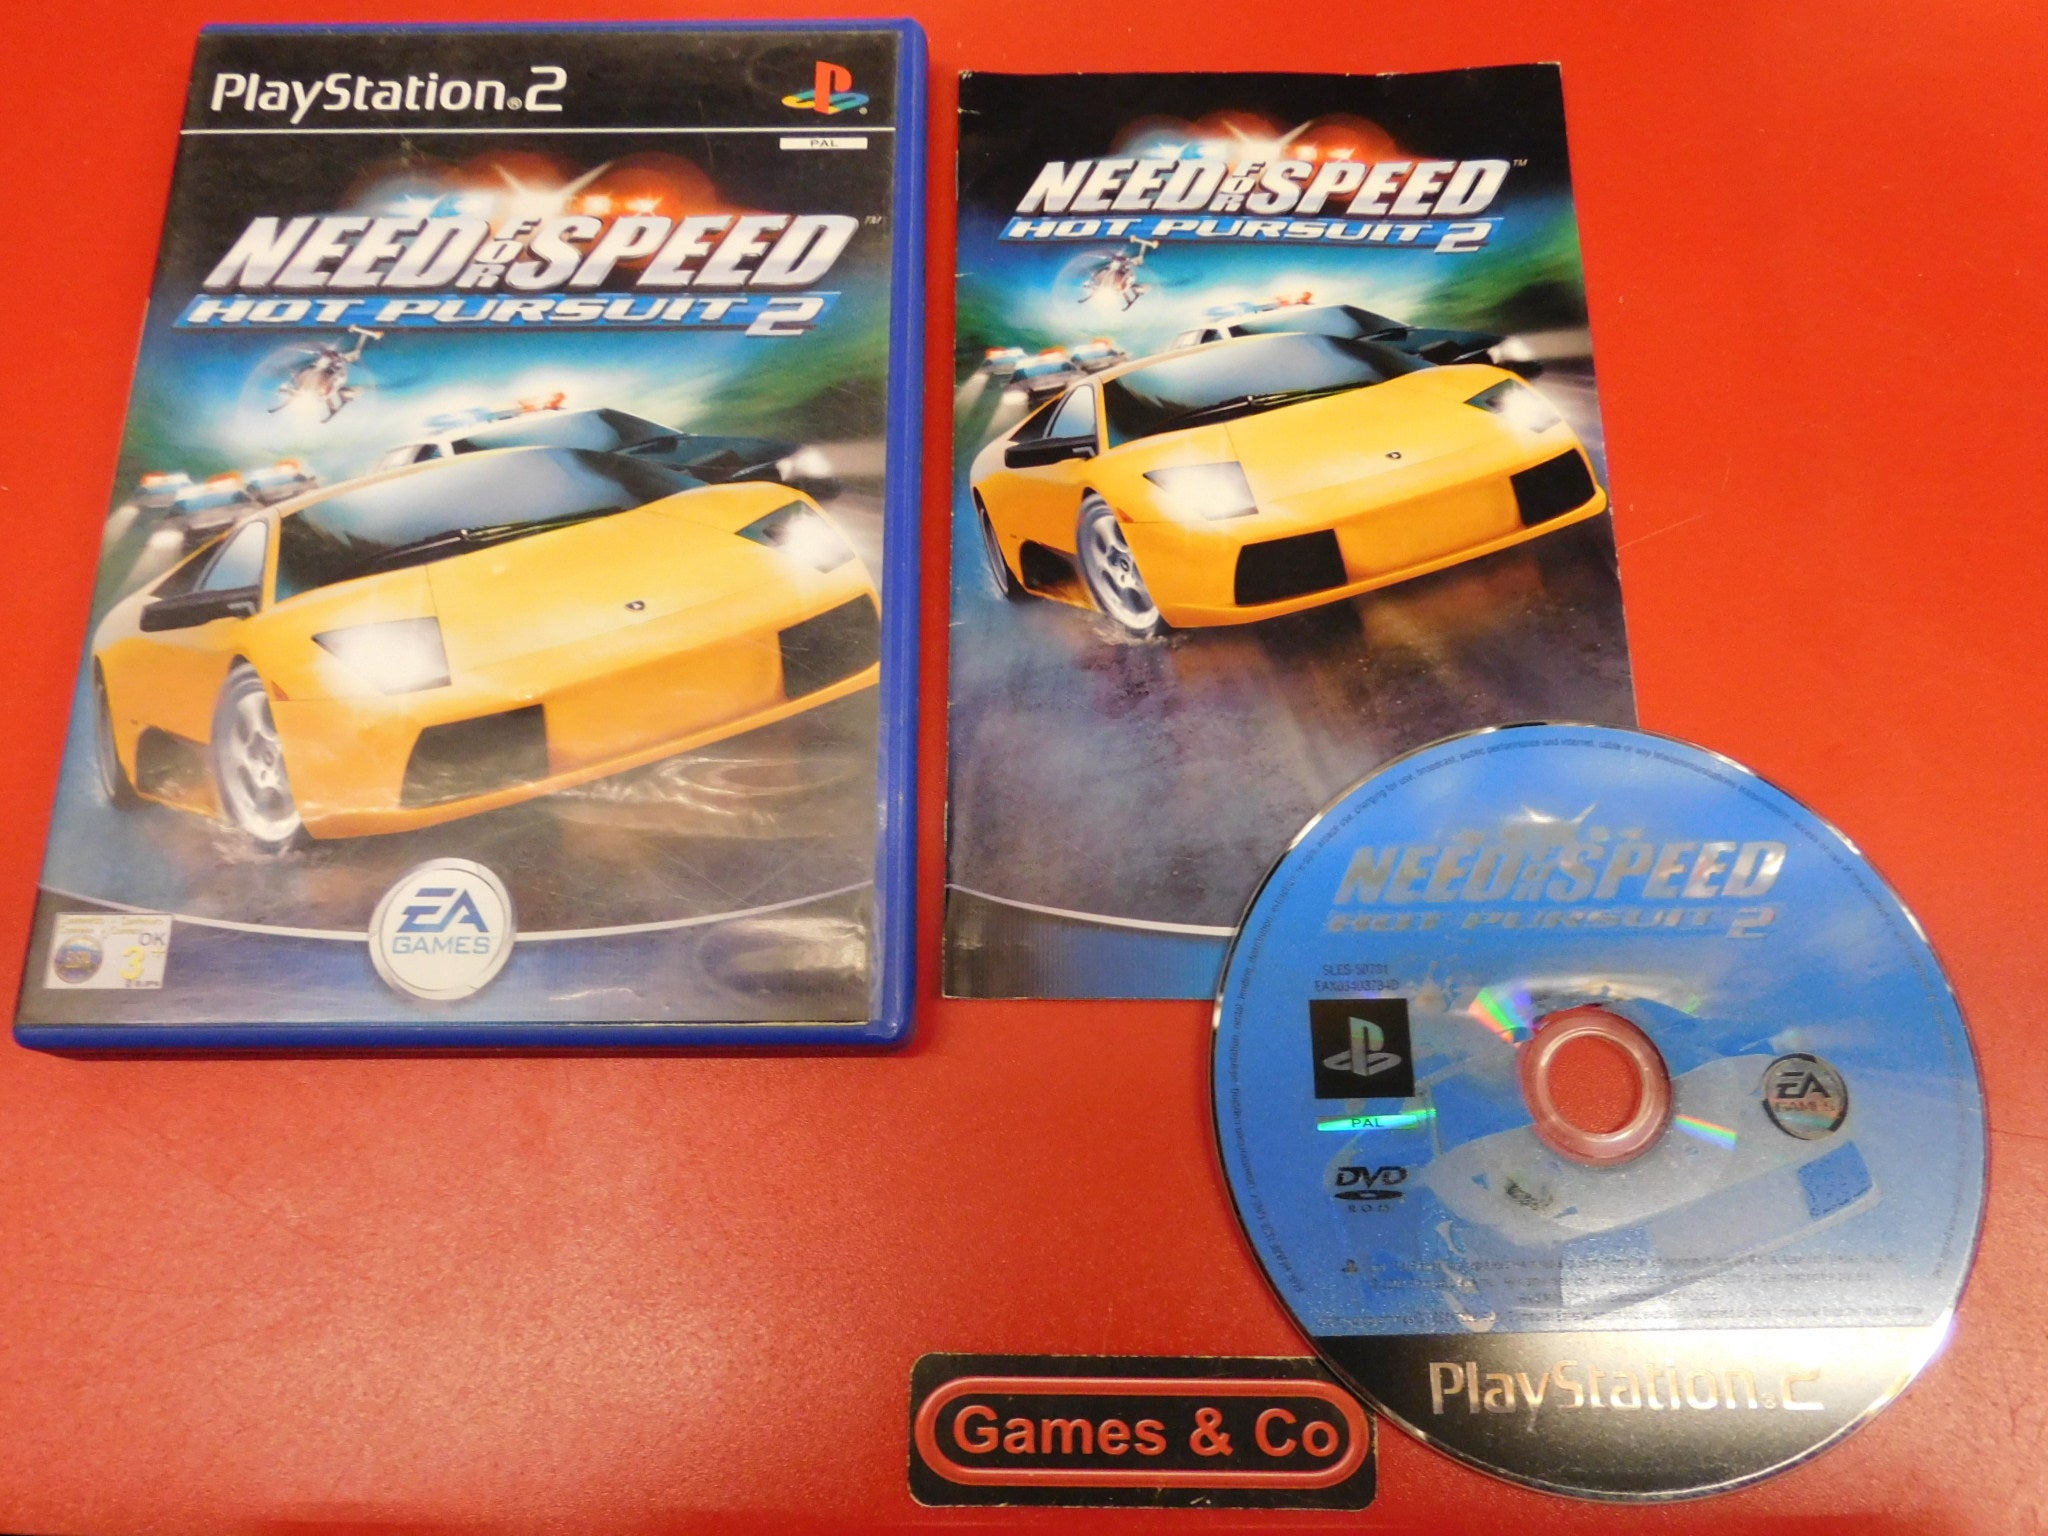 NEED FOR SPEED HOT PURSUIT 2